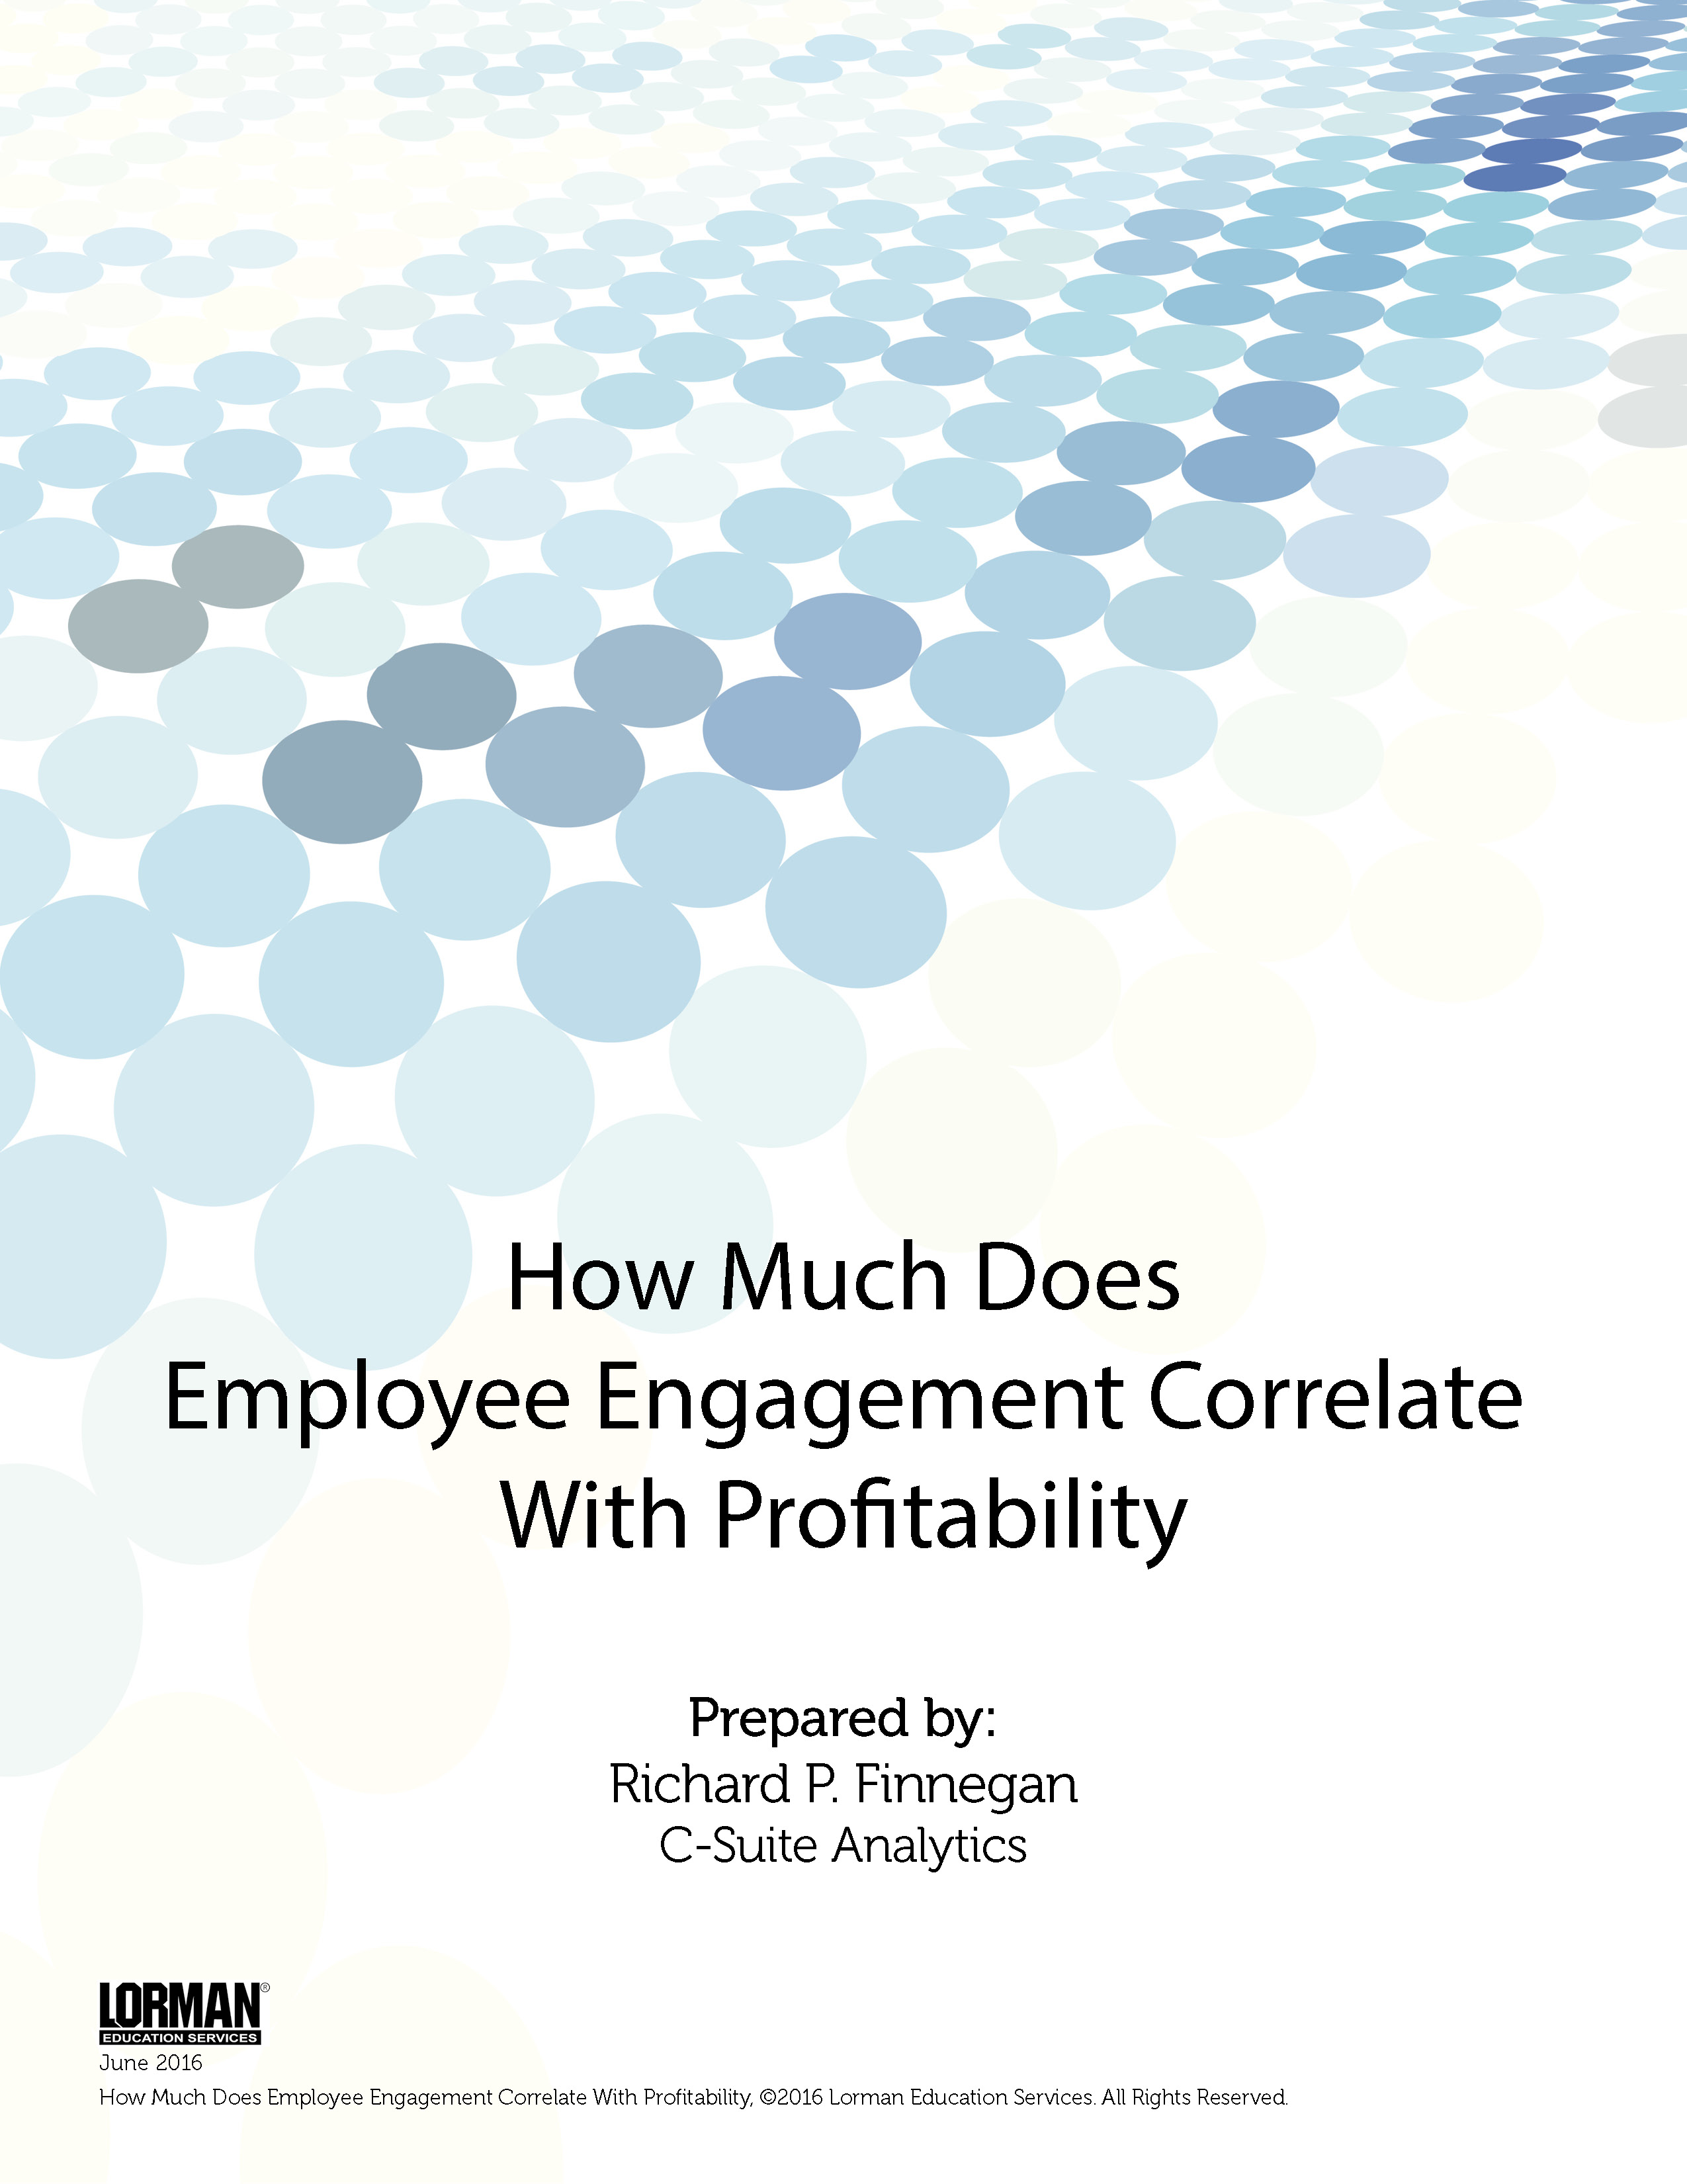 How Much Does Employee Engagement Correlate With Profitability